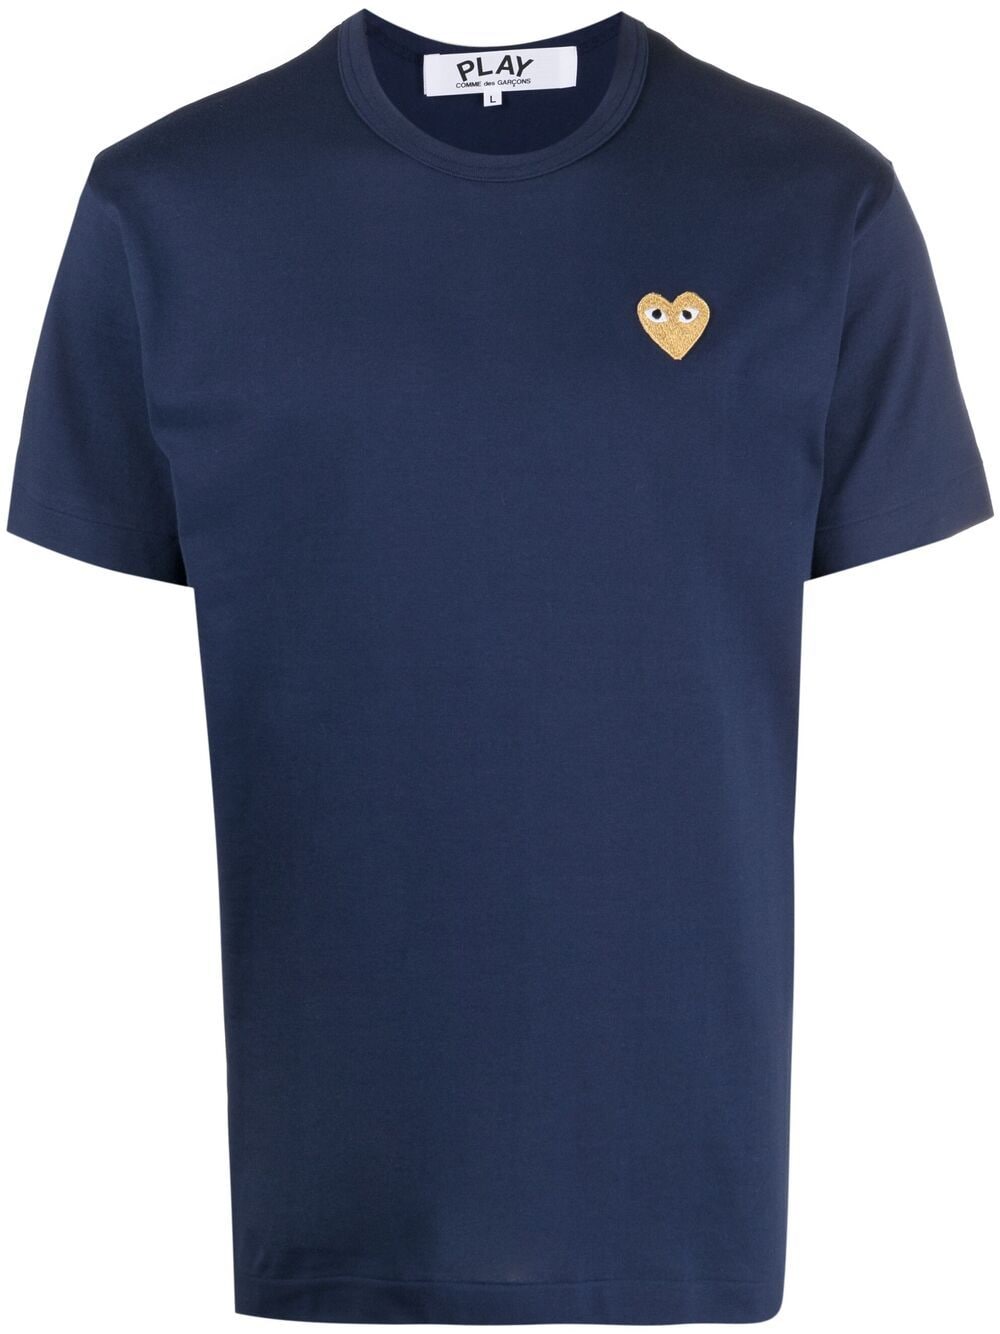 Comme Des Garçons Play embroidered heart T-shirt - Blue von Comme Des Garçons Play